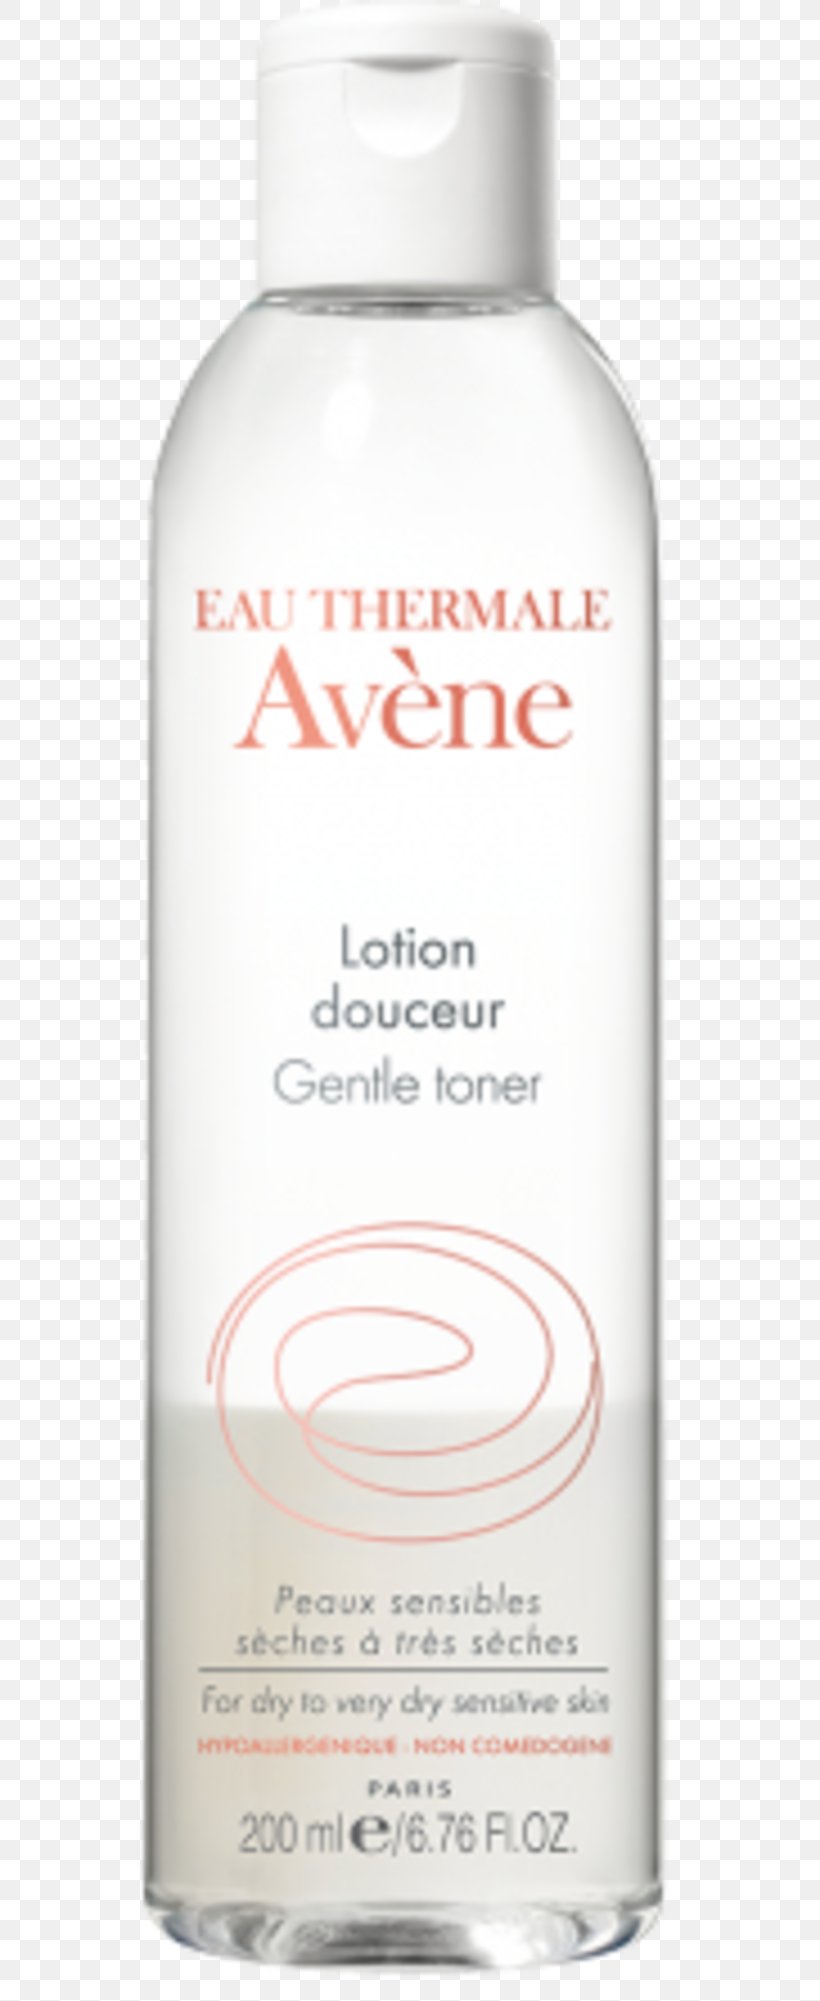 Avène Micellar Lotion Cleanser And Make-up Remover Toner Liquid, PNG, 550x2001px, Lotion, Cleanser, Cosmetics, Liquid, Micelle Download Free